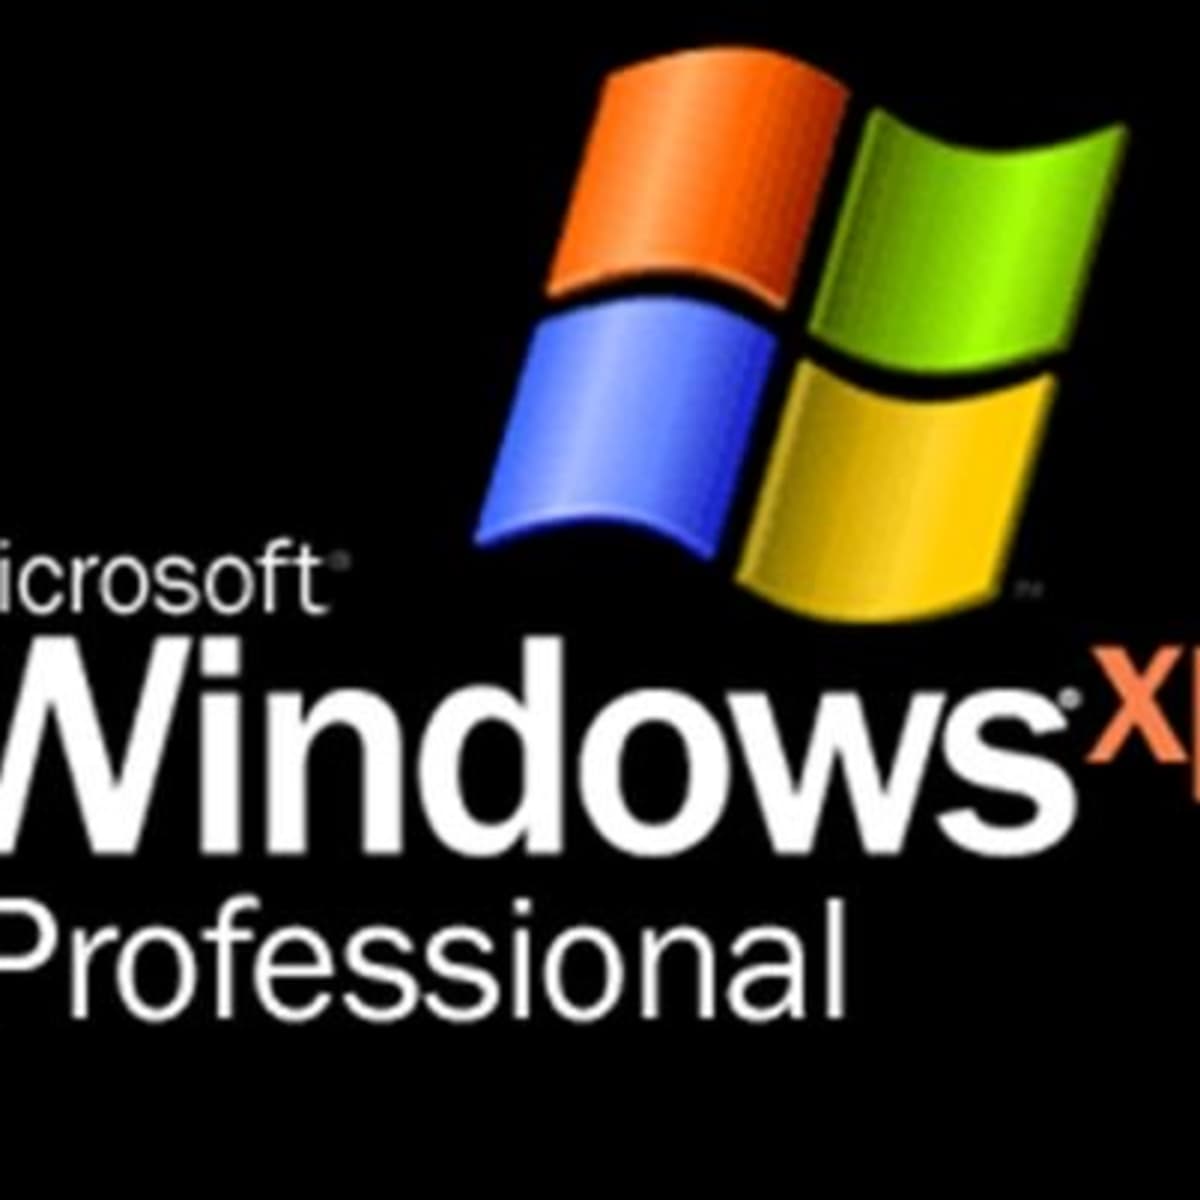 cannot install flash player in windows xp